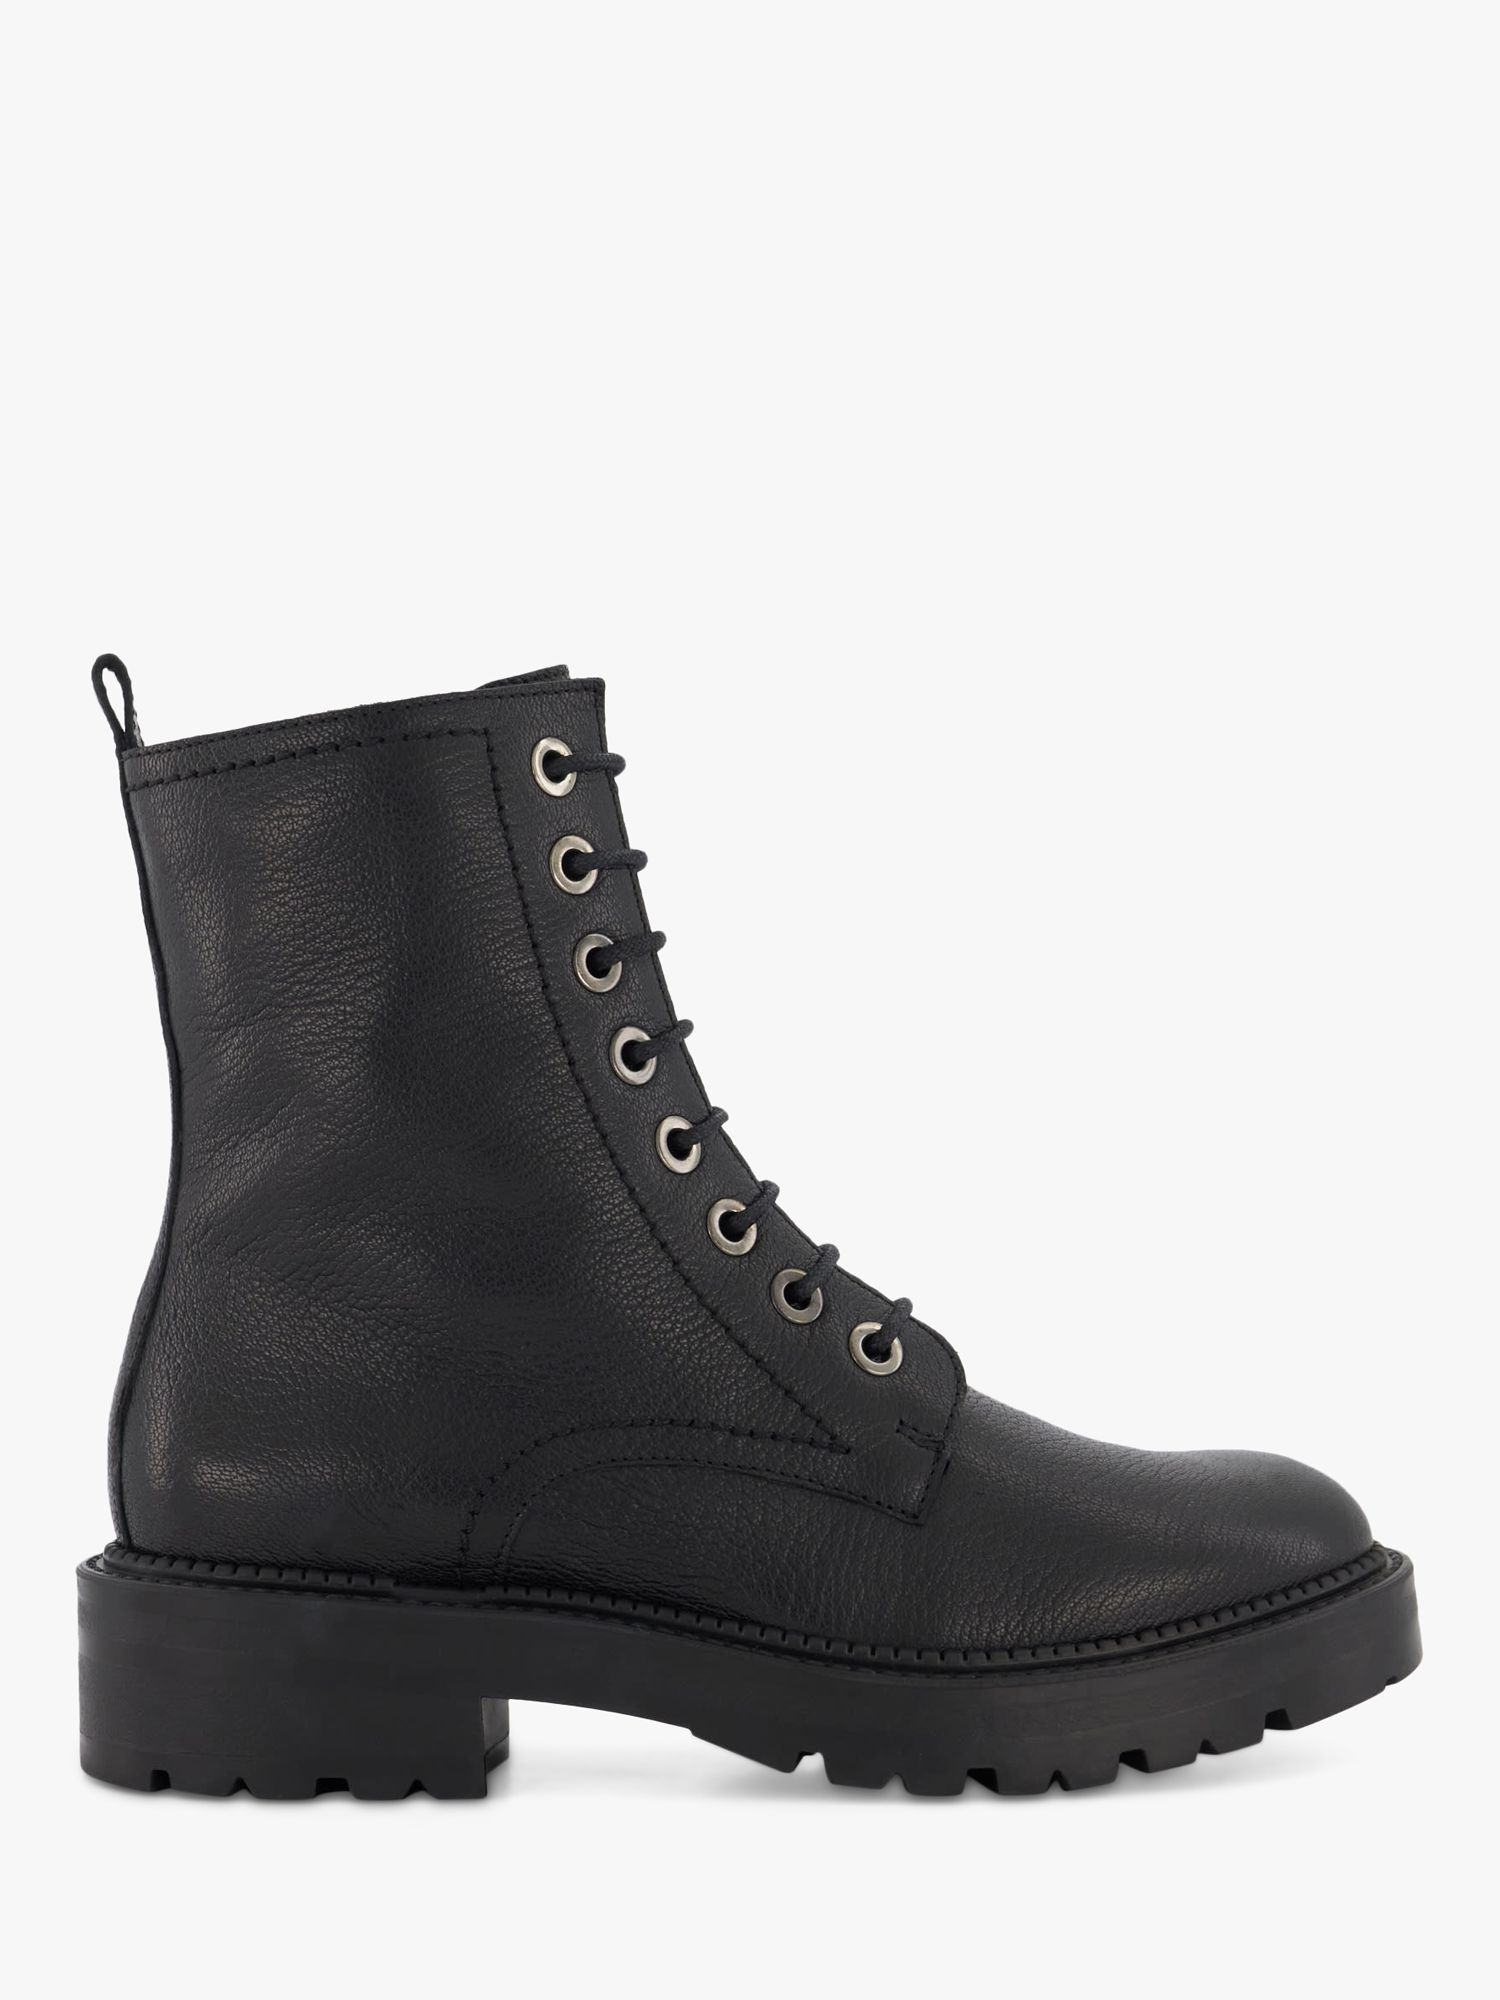 Dune Press Leather Cleated Hiker Boots, Black at John Lewis & Partners